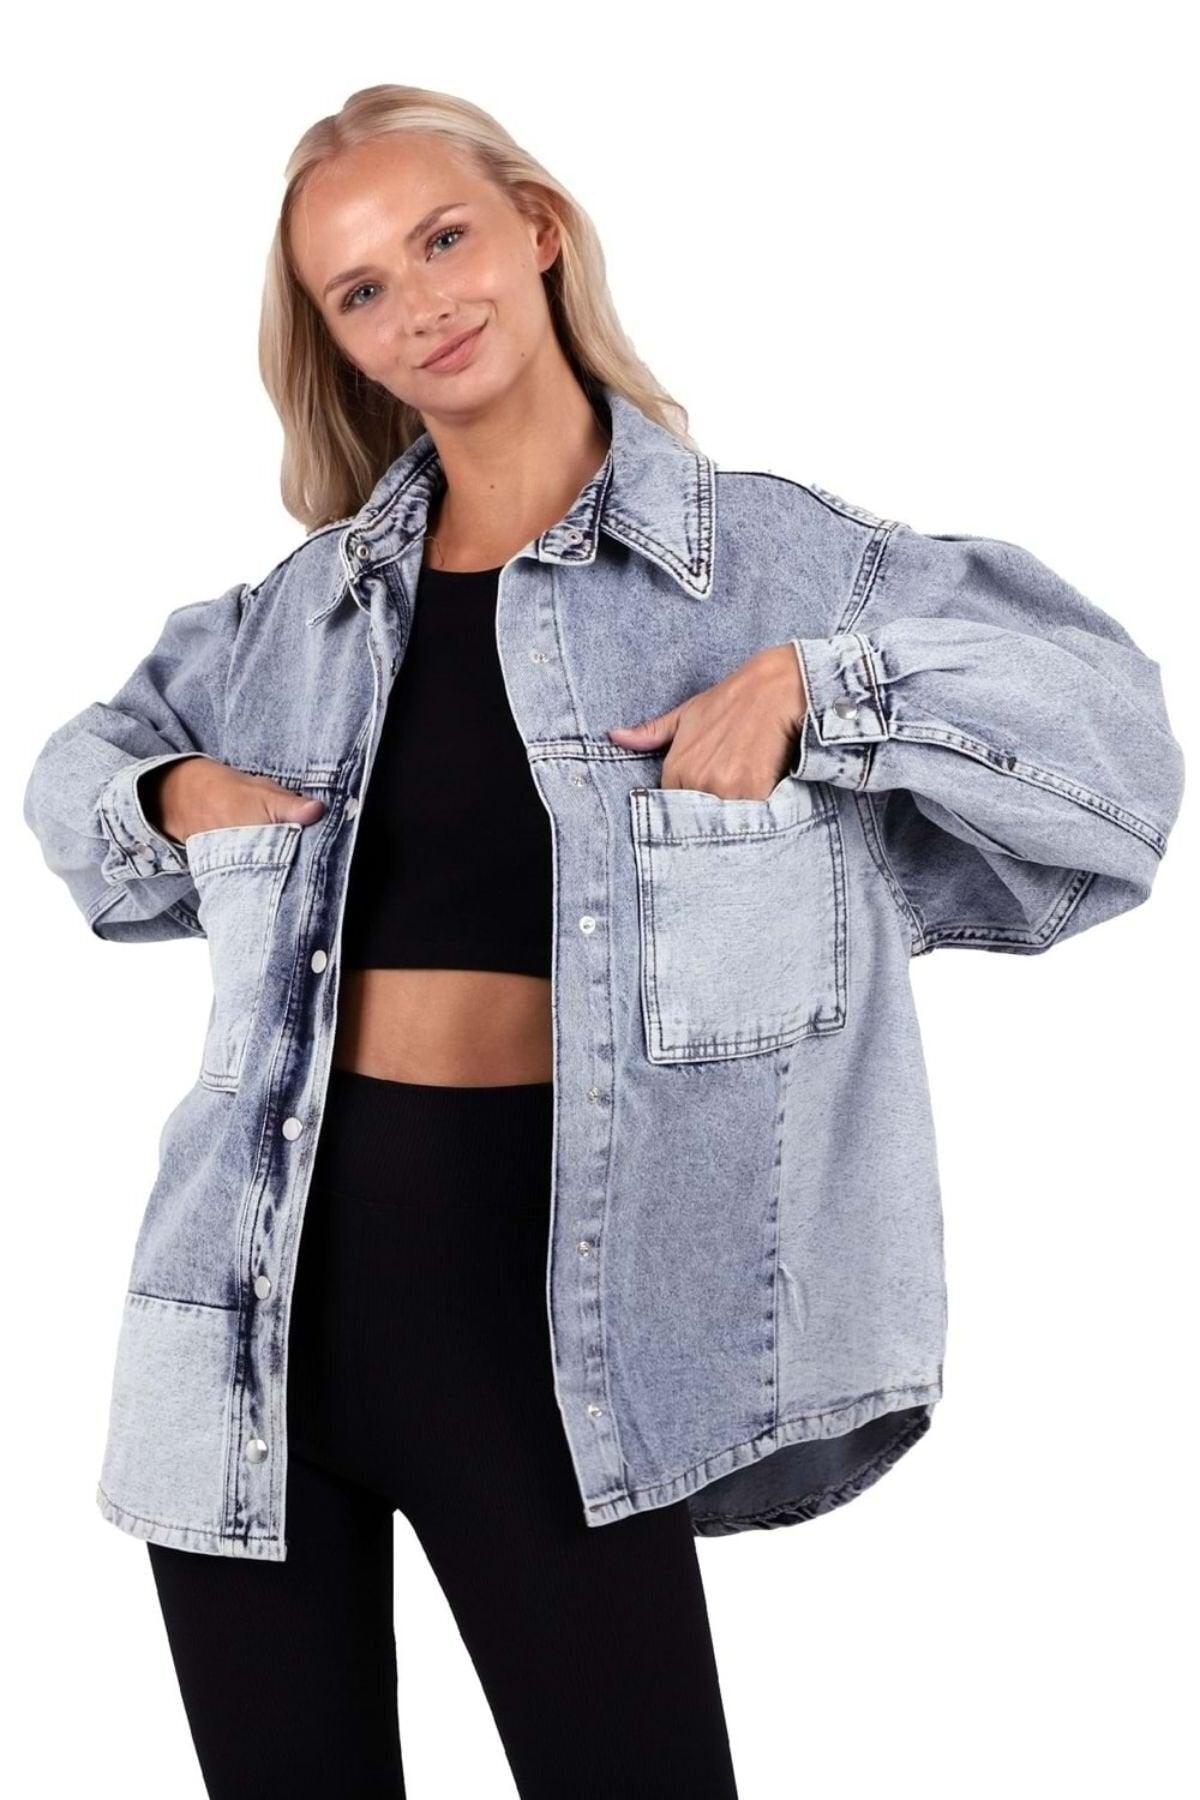 Multicolored Pocket And Long Sleeve Classic Collar Oversize Jeans Women's Jacket Cotton - Swordslife